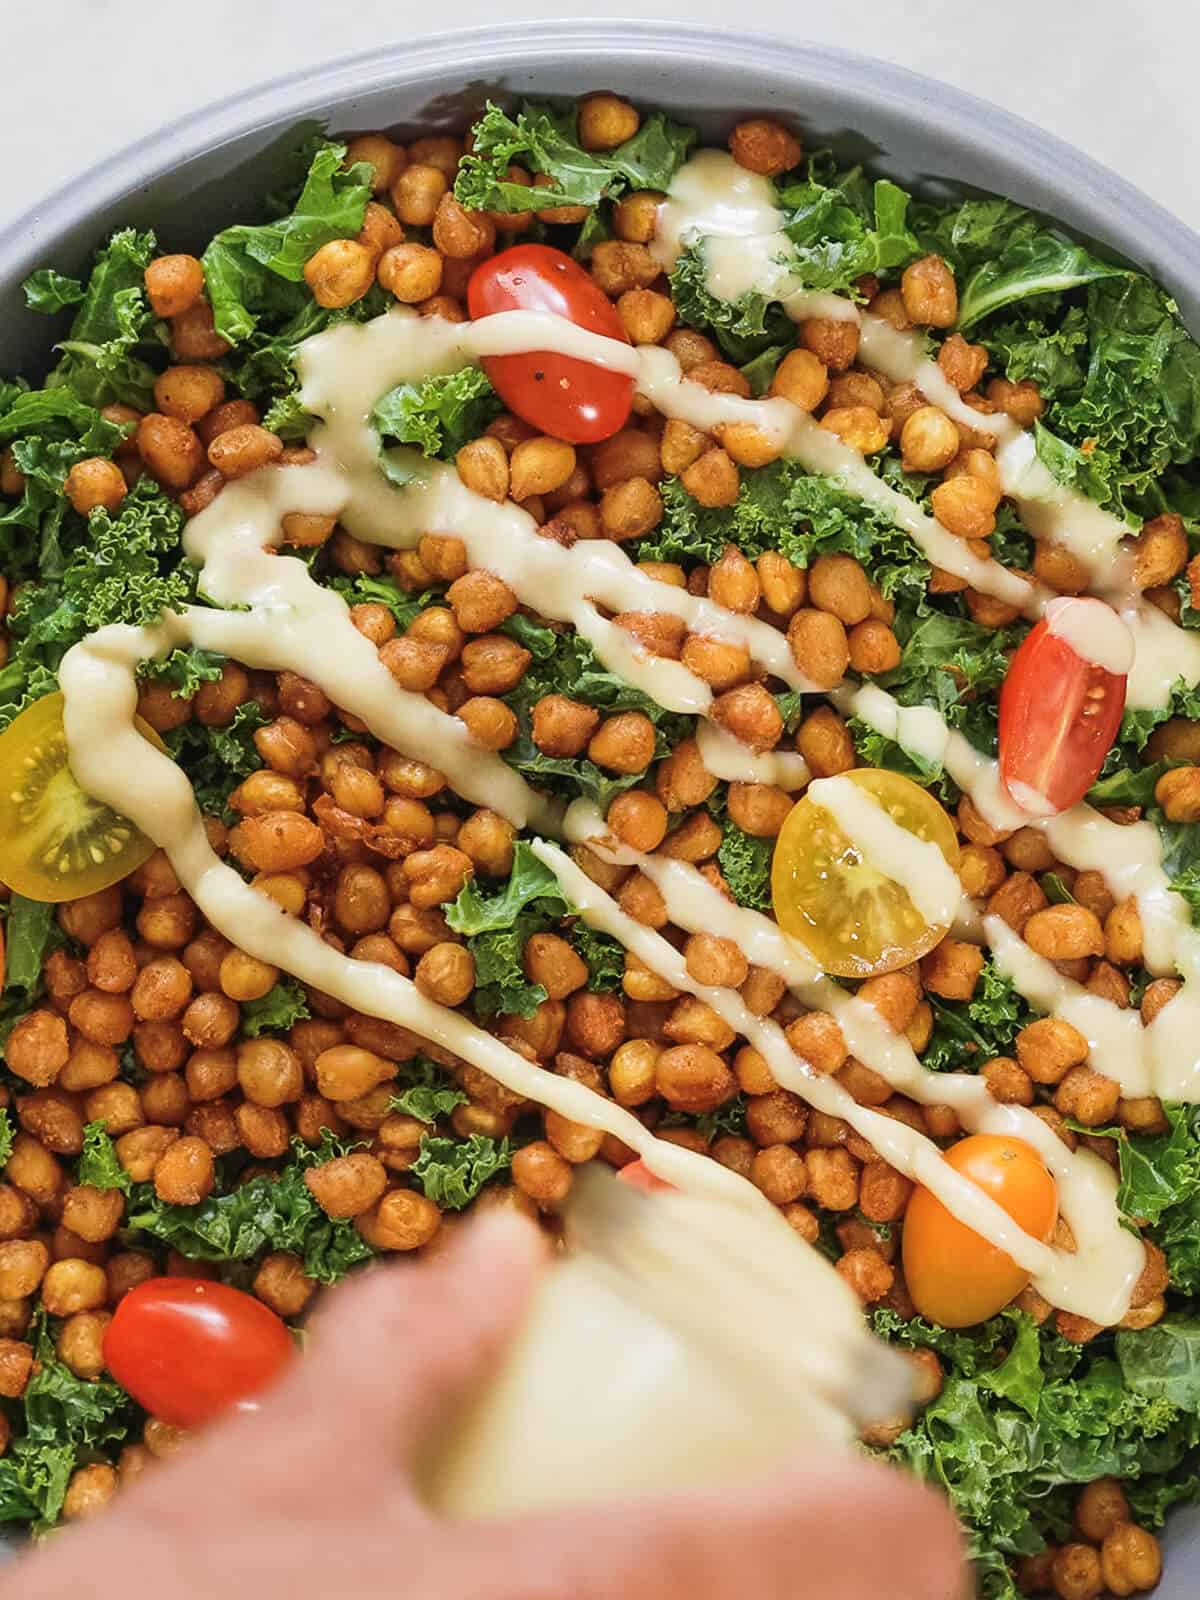 drizzling tahini sauce in a chickpea and kale salad.